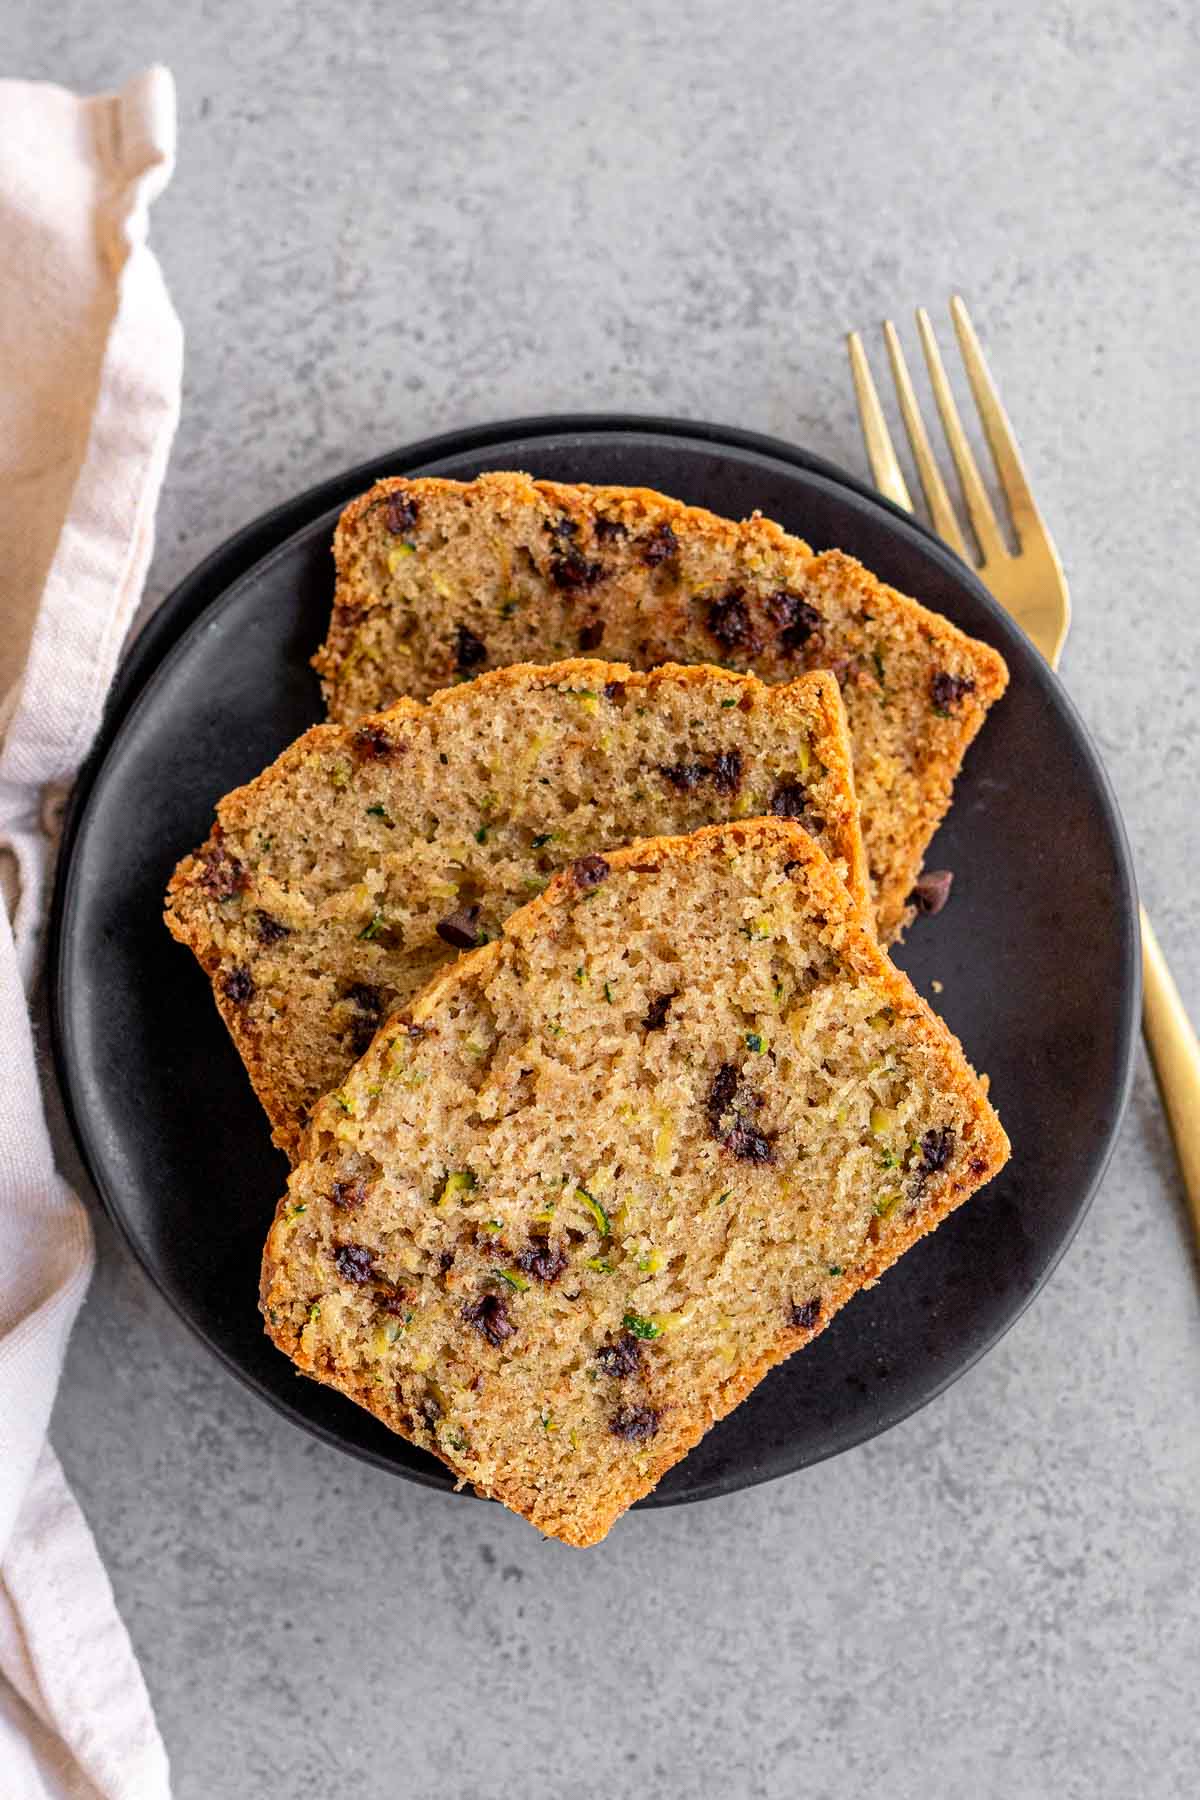 Chocolate Chip Zucchini Bread slices on plate